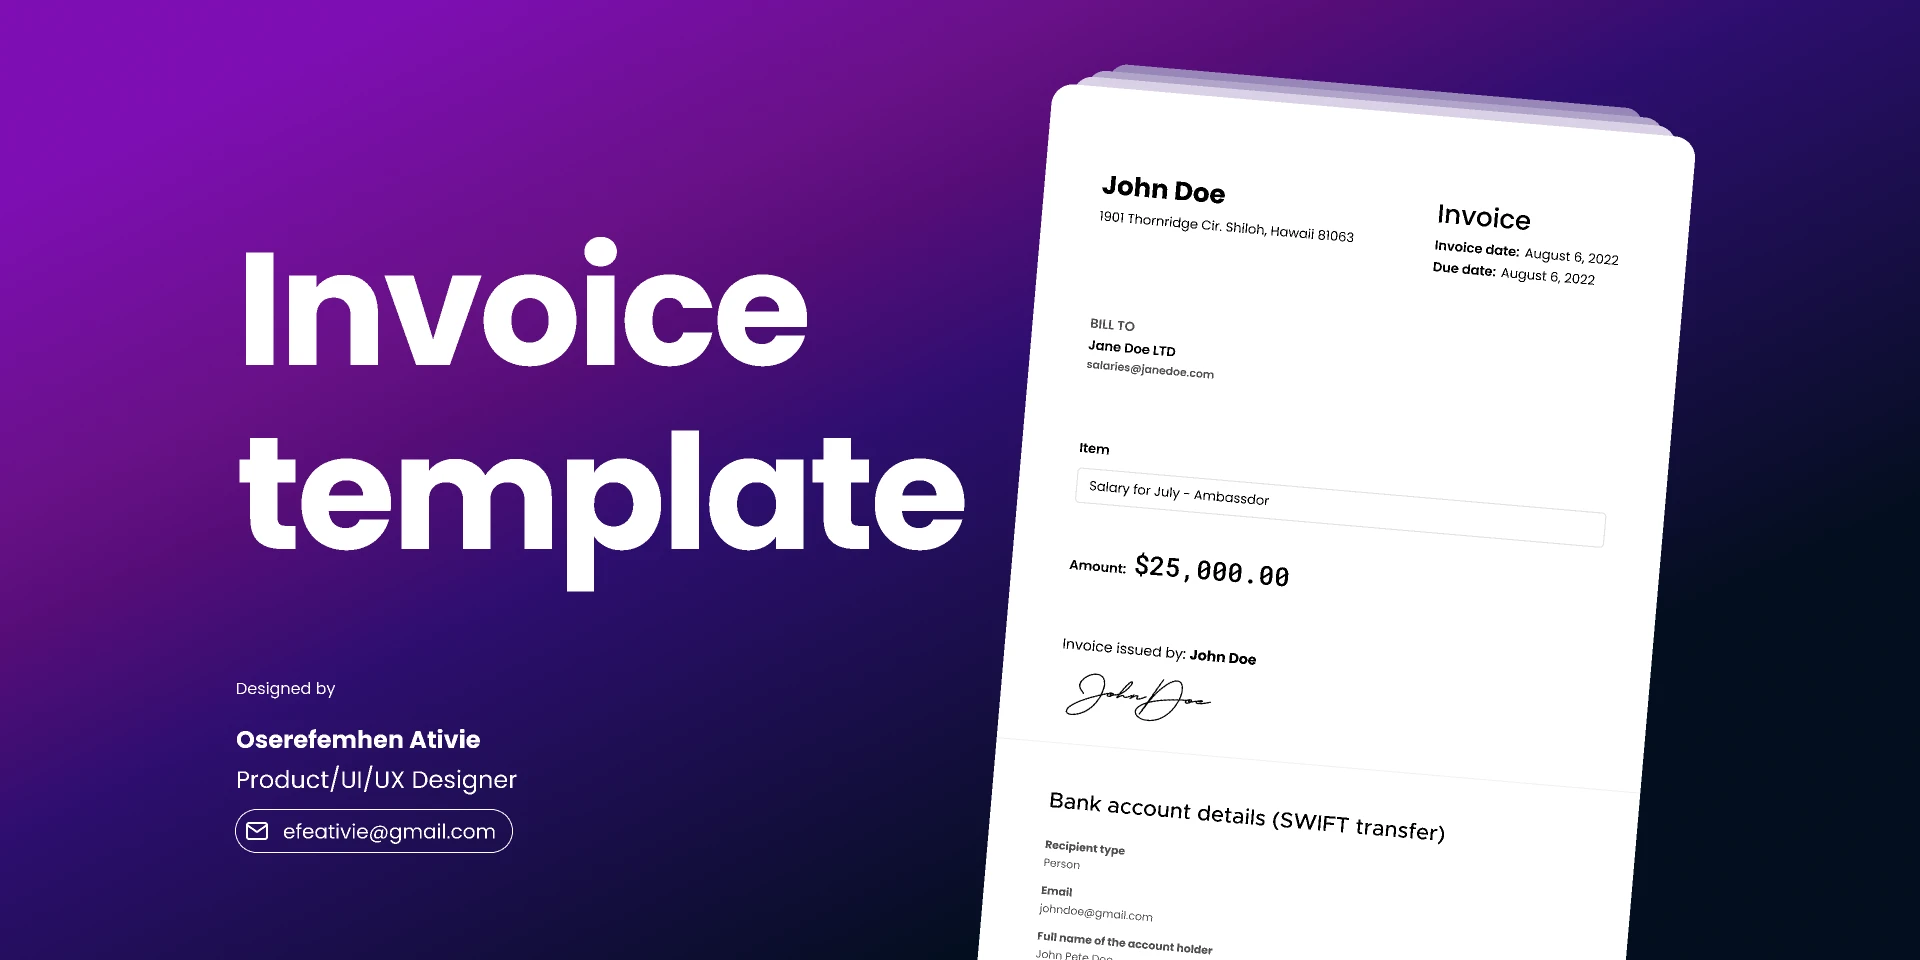 Invoice template for Figma and Adobe XD